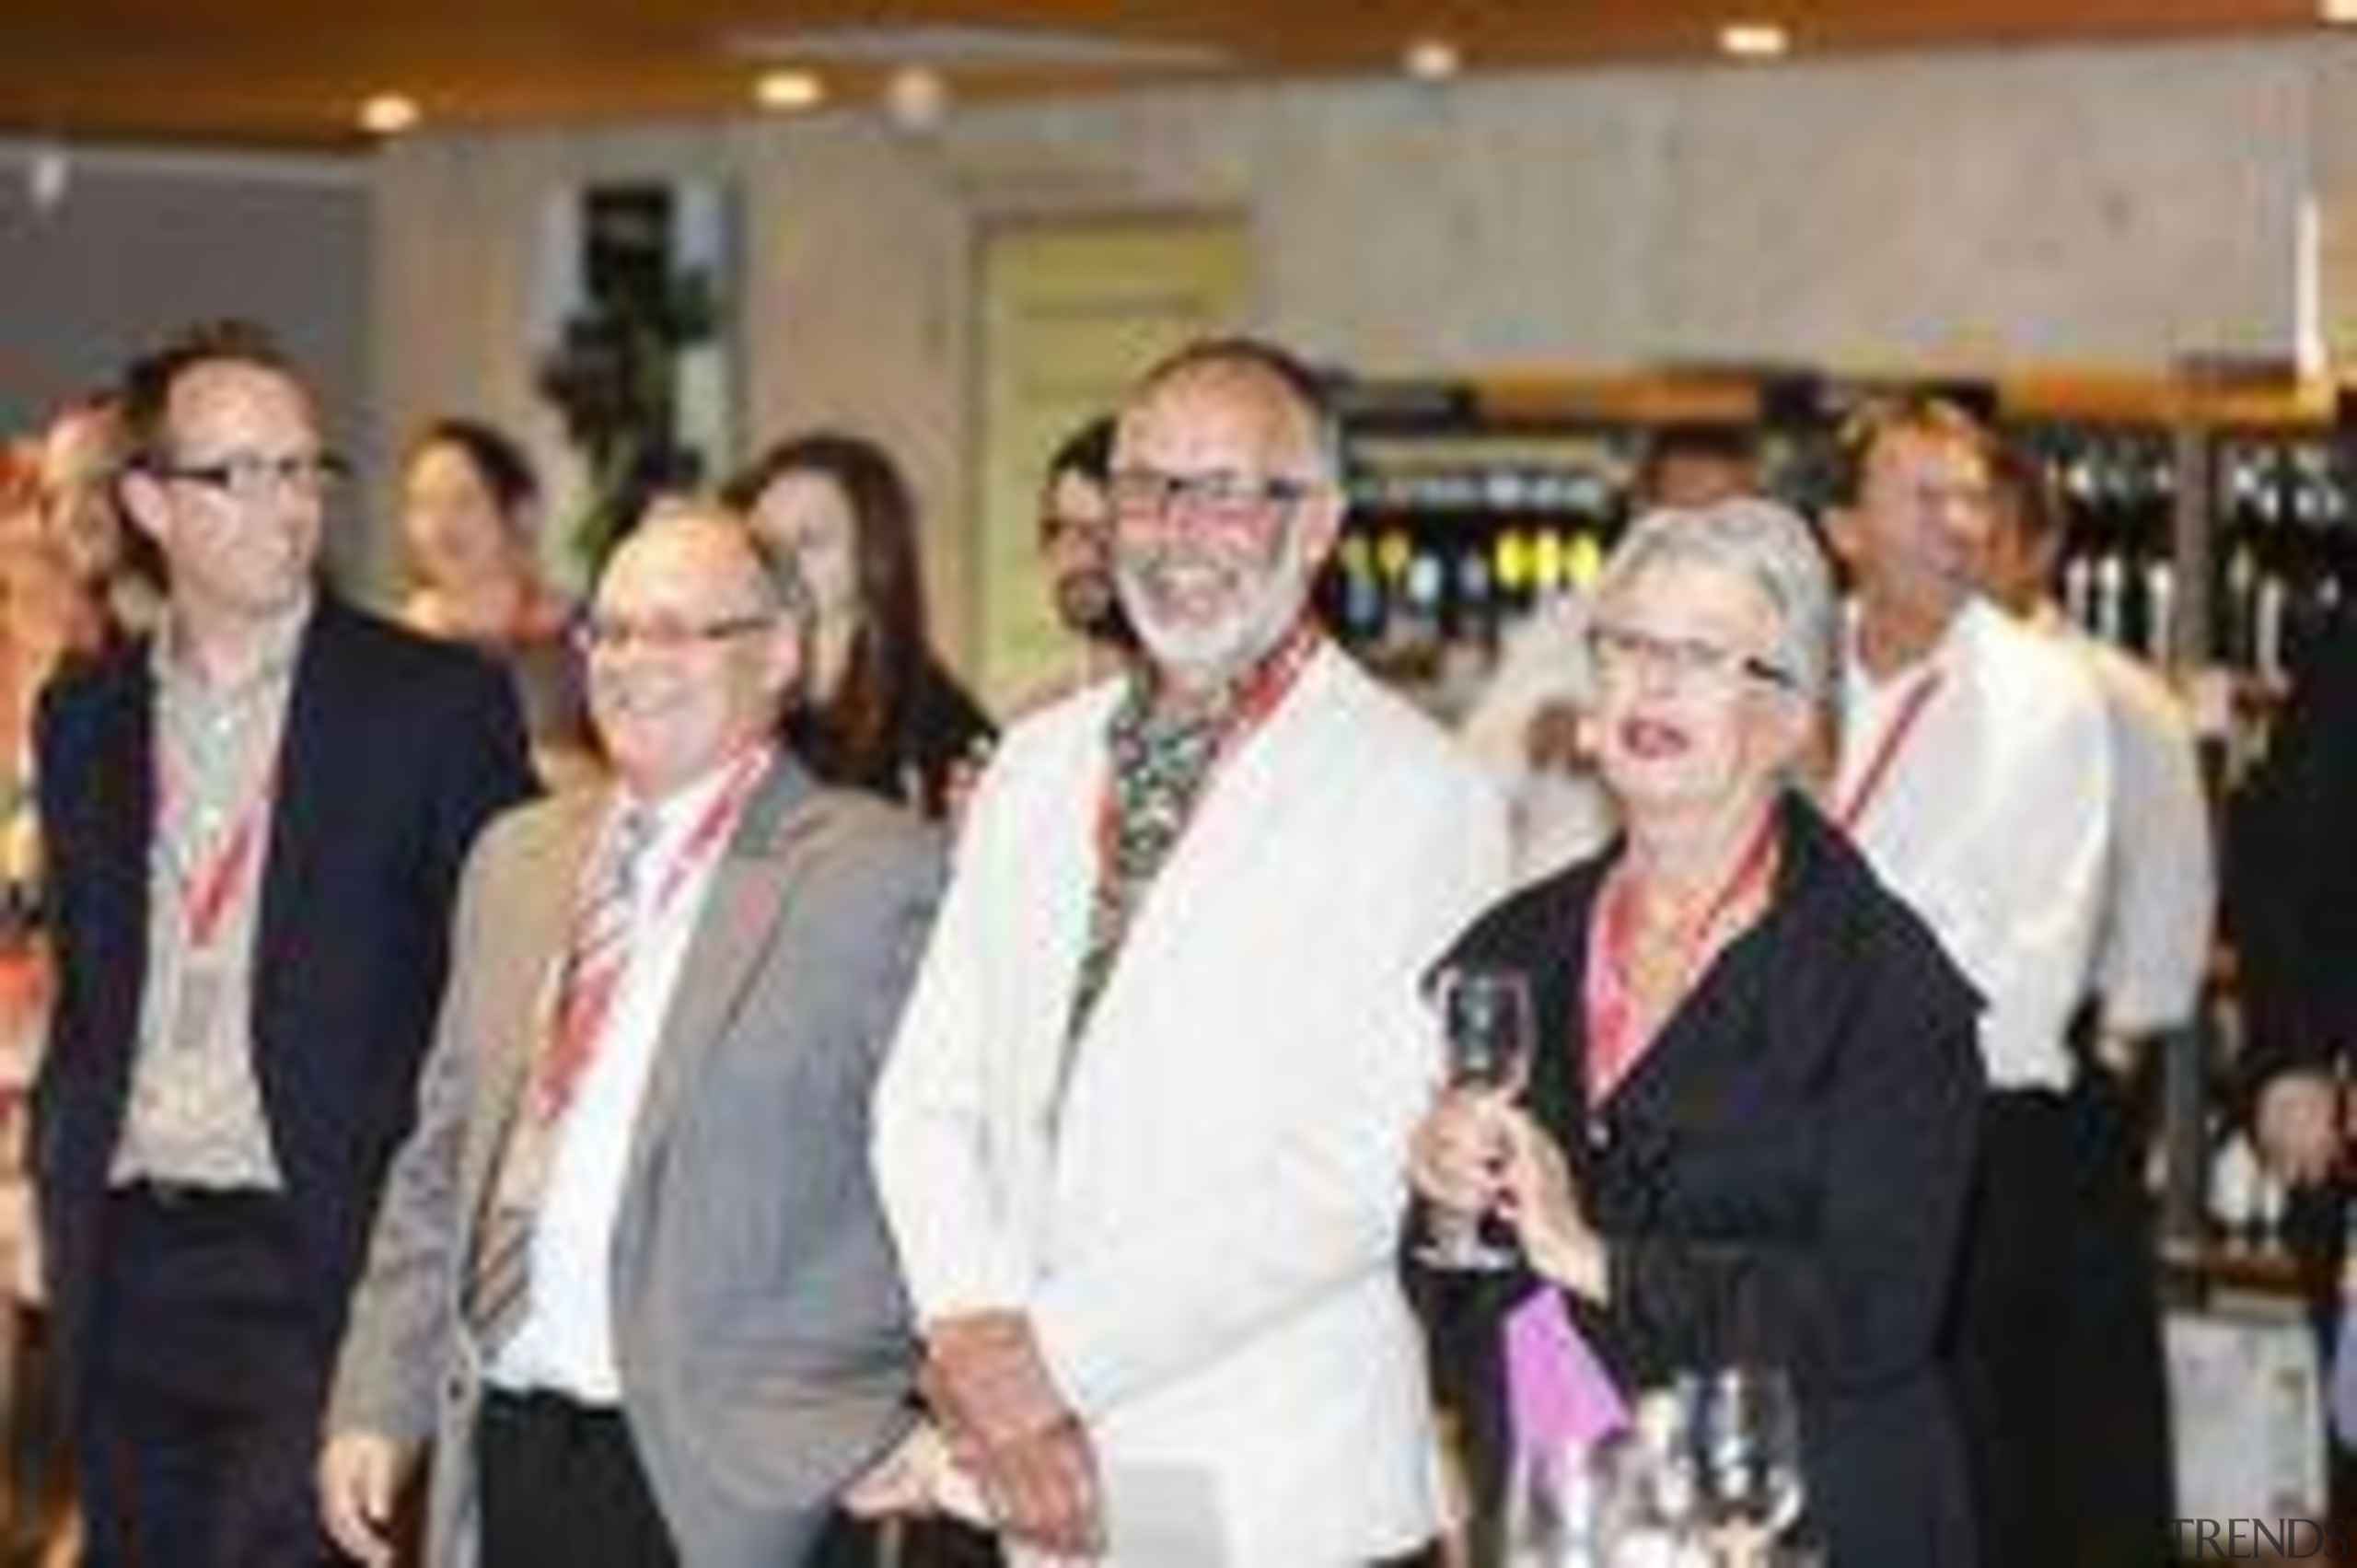 Laminex NZ's Jesse Staines &amp; Graham Wilkins with community, event, fashion, professional, senior citizen, socialite, gray